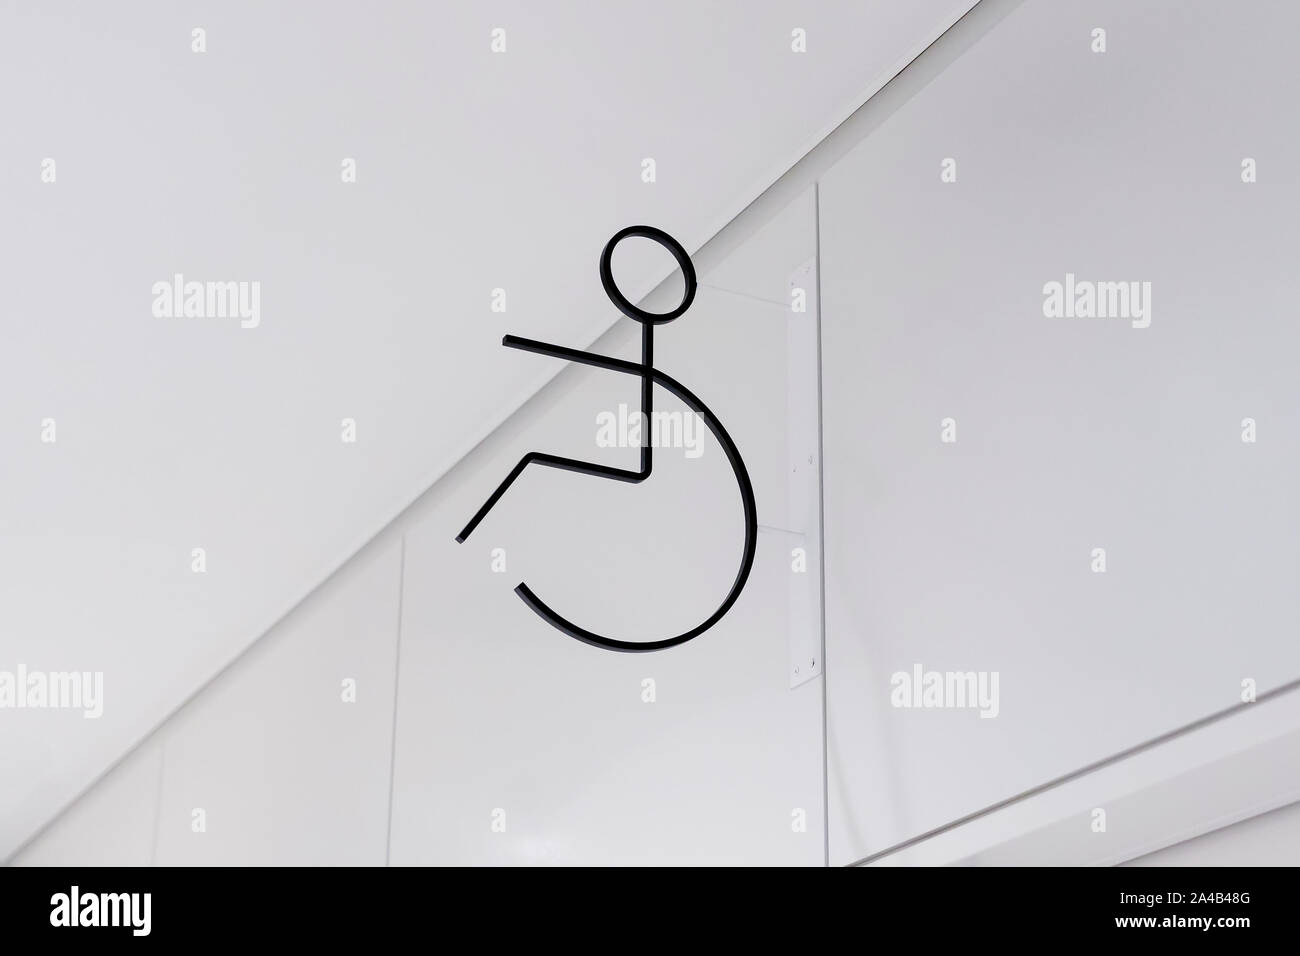 The Sign of Handicap's WC or Bathroom. Black Contour Line of the Toilet Icon for Disabled People. Silhouette of Man in the Wheelchair for the Restroom Stock Photo